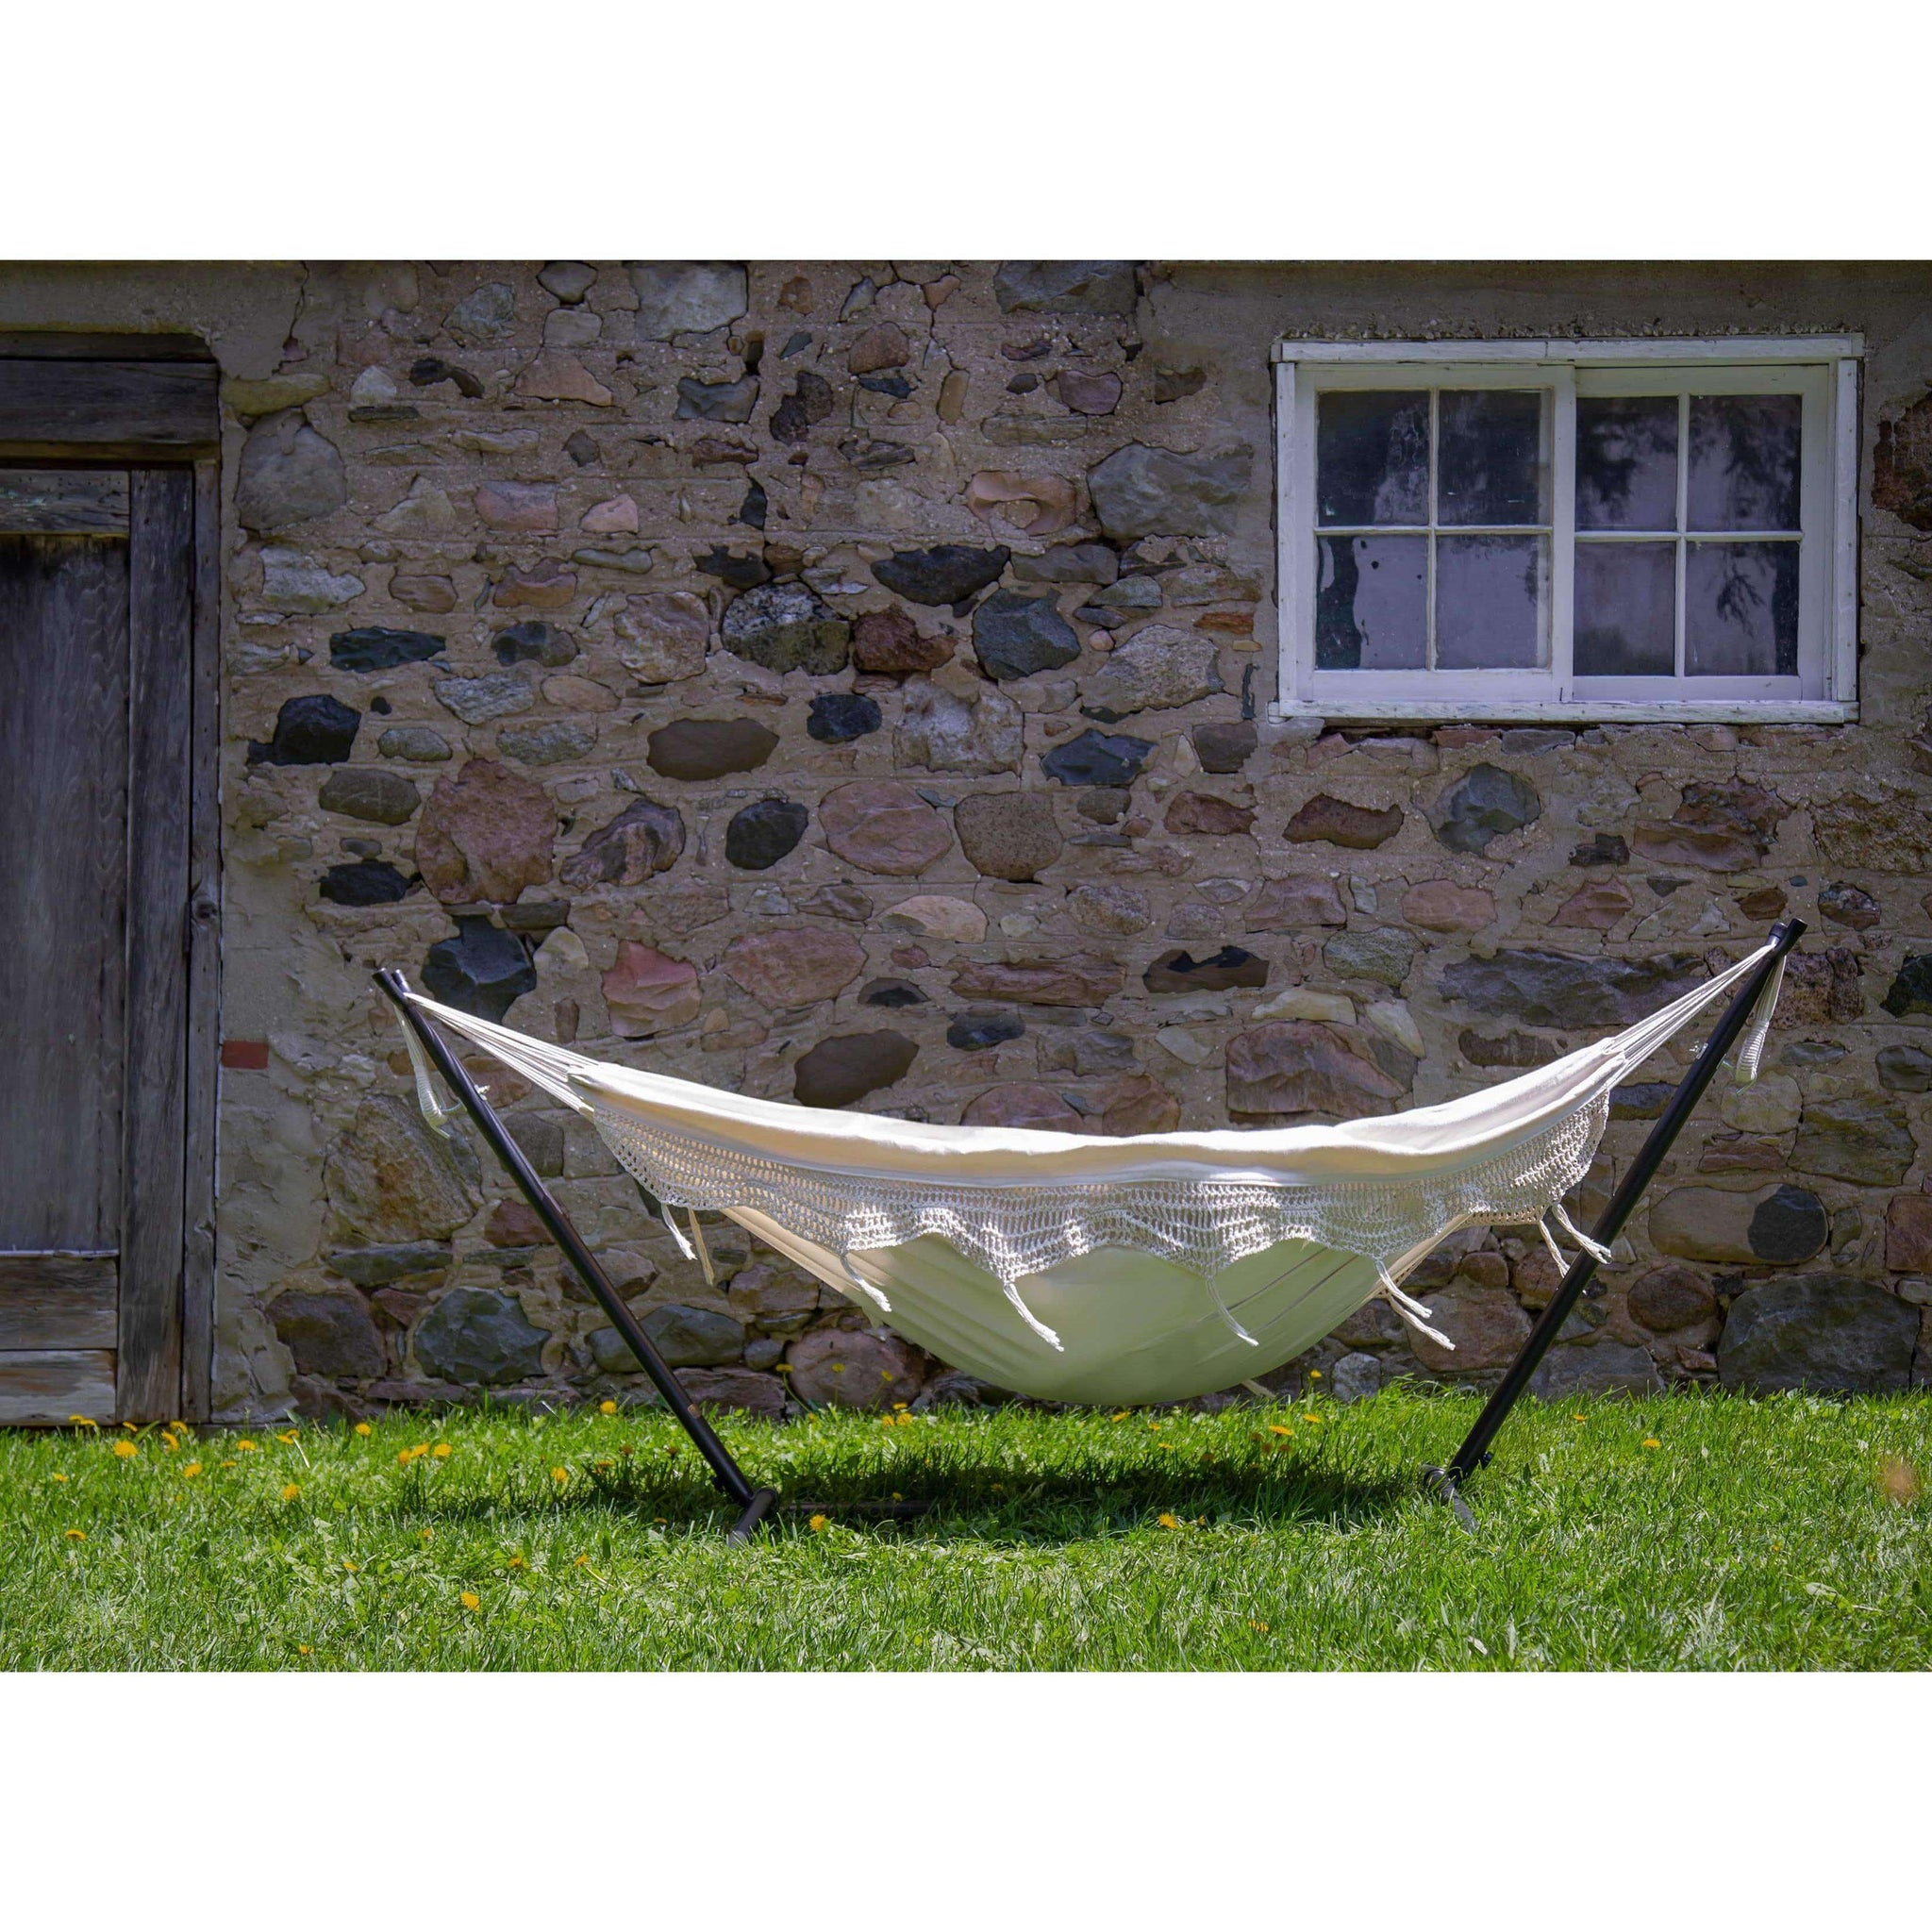 double-cotton-hammock-with-stand-natural-with-fringe